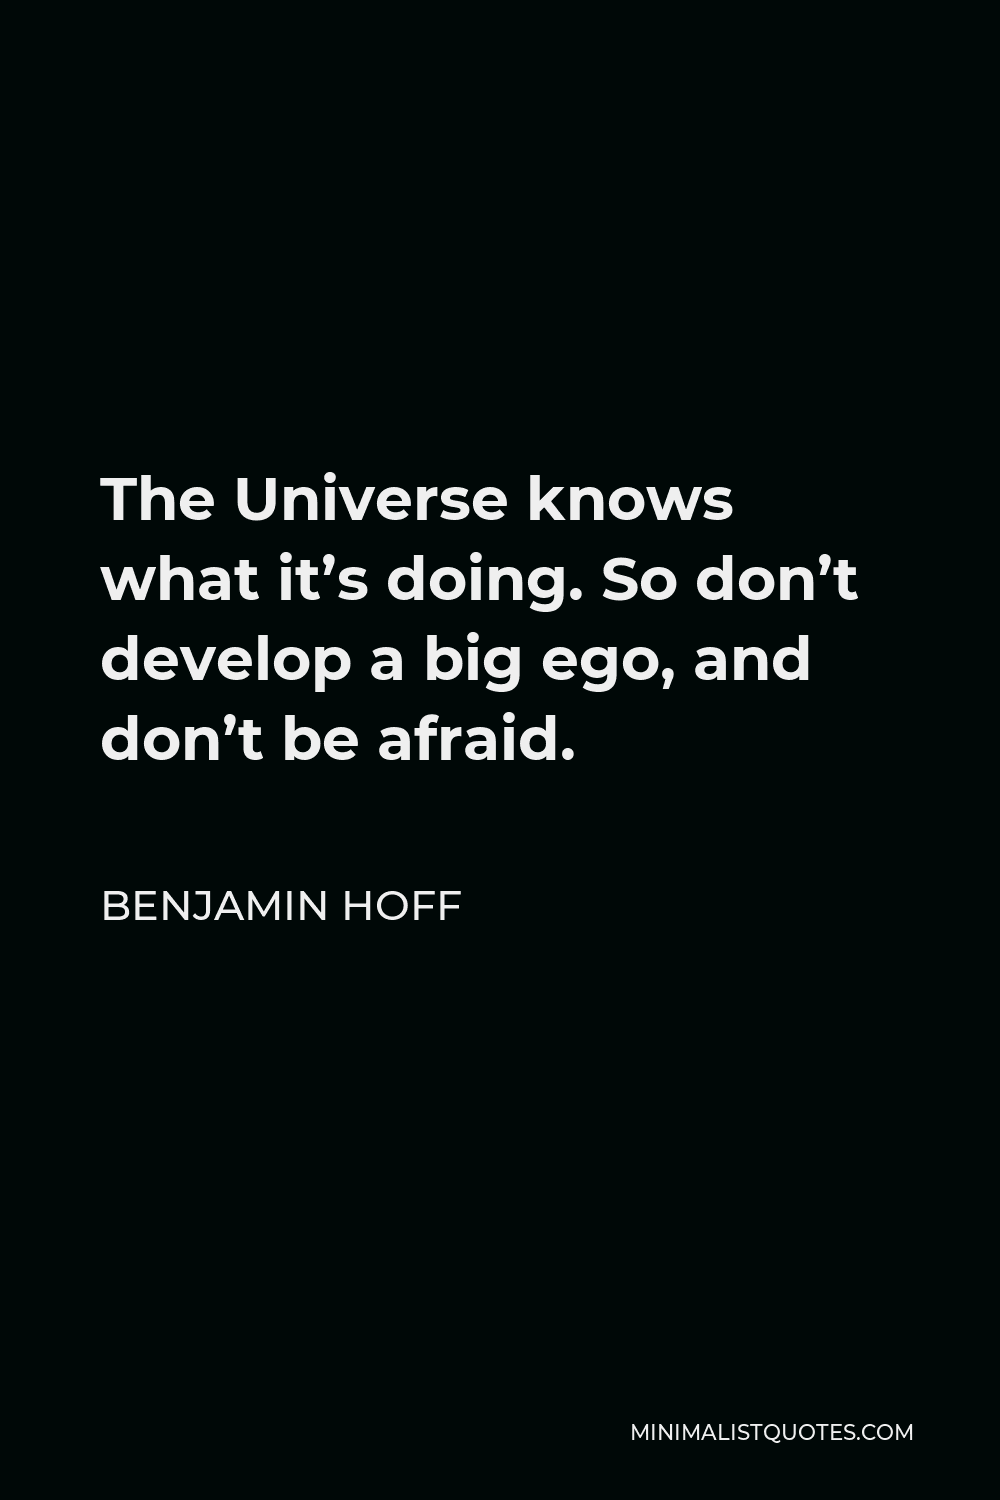 Benjamin Hoff Quote - The Universe knows what it’s doing. So don’t develop a big ego, and don’t be afraid.